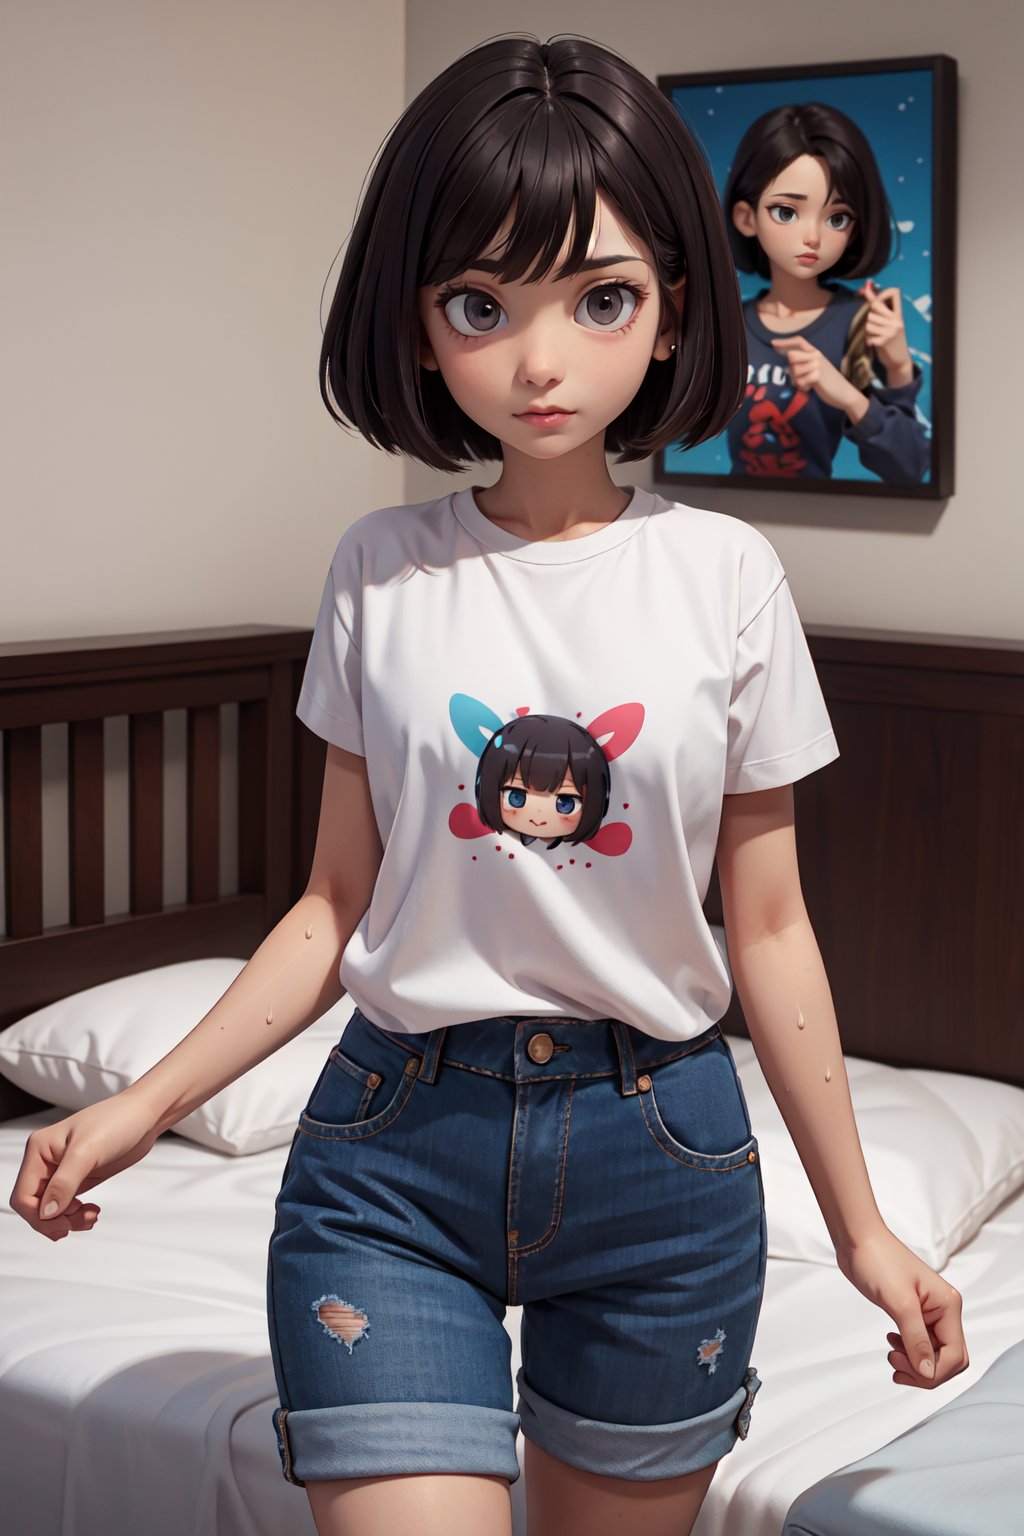 8k,best quality,masterpiece,ultra high res,portrait,beautiful,kawaii,dark hair,bob,clothes,from front,sweat,on the bed,jmf,jml